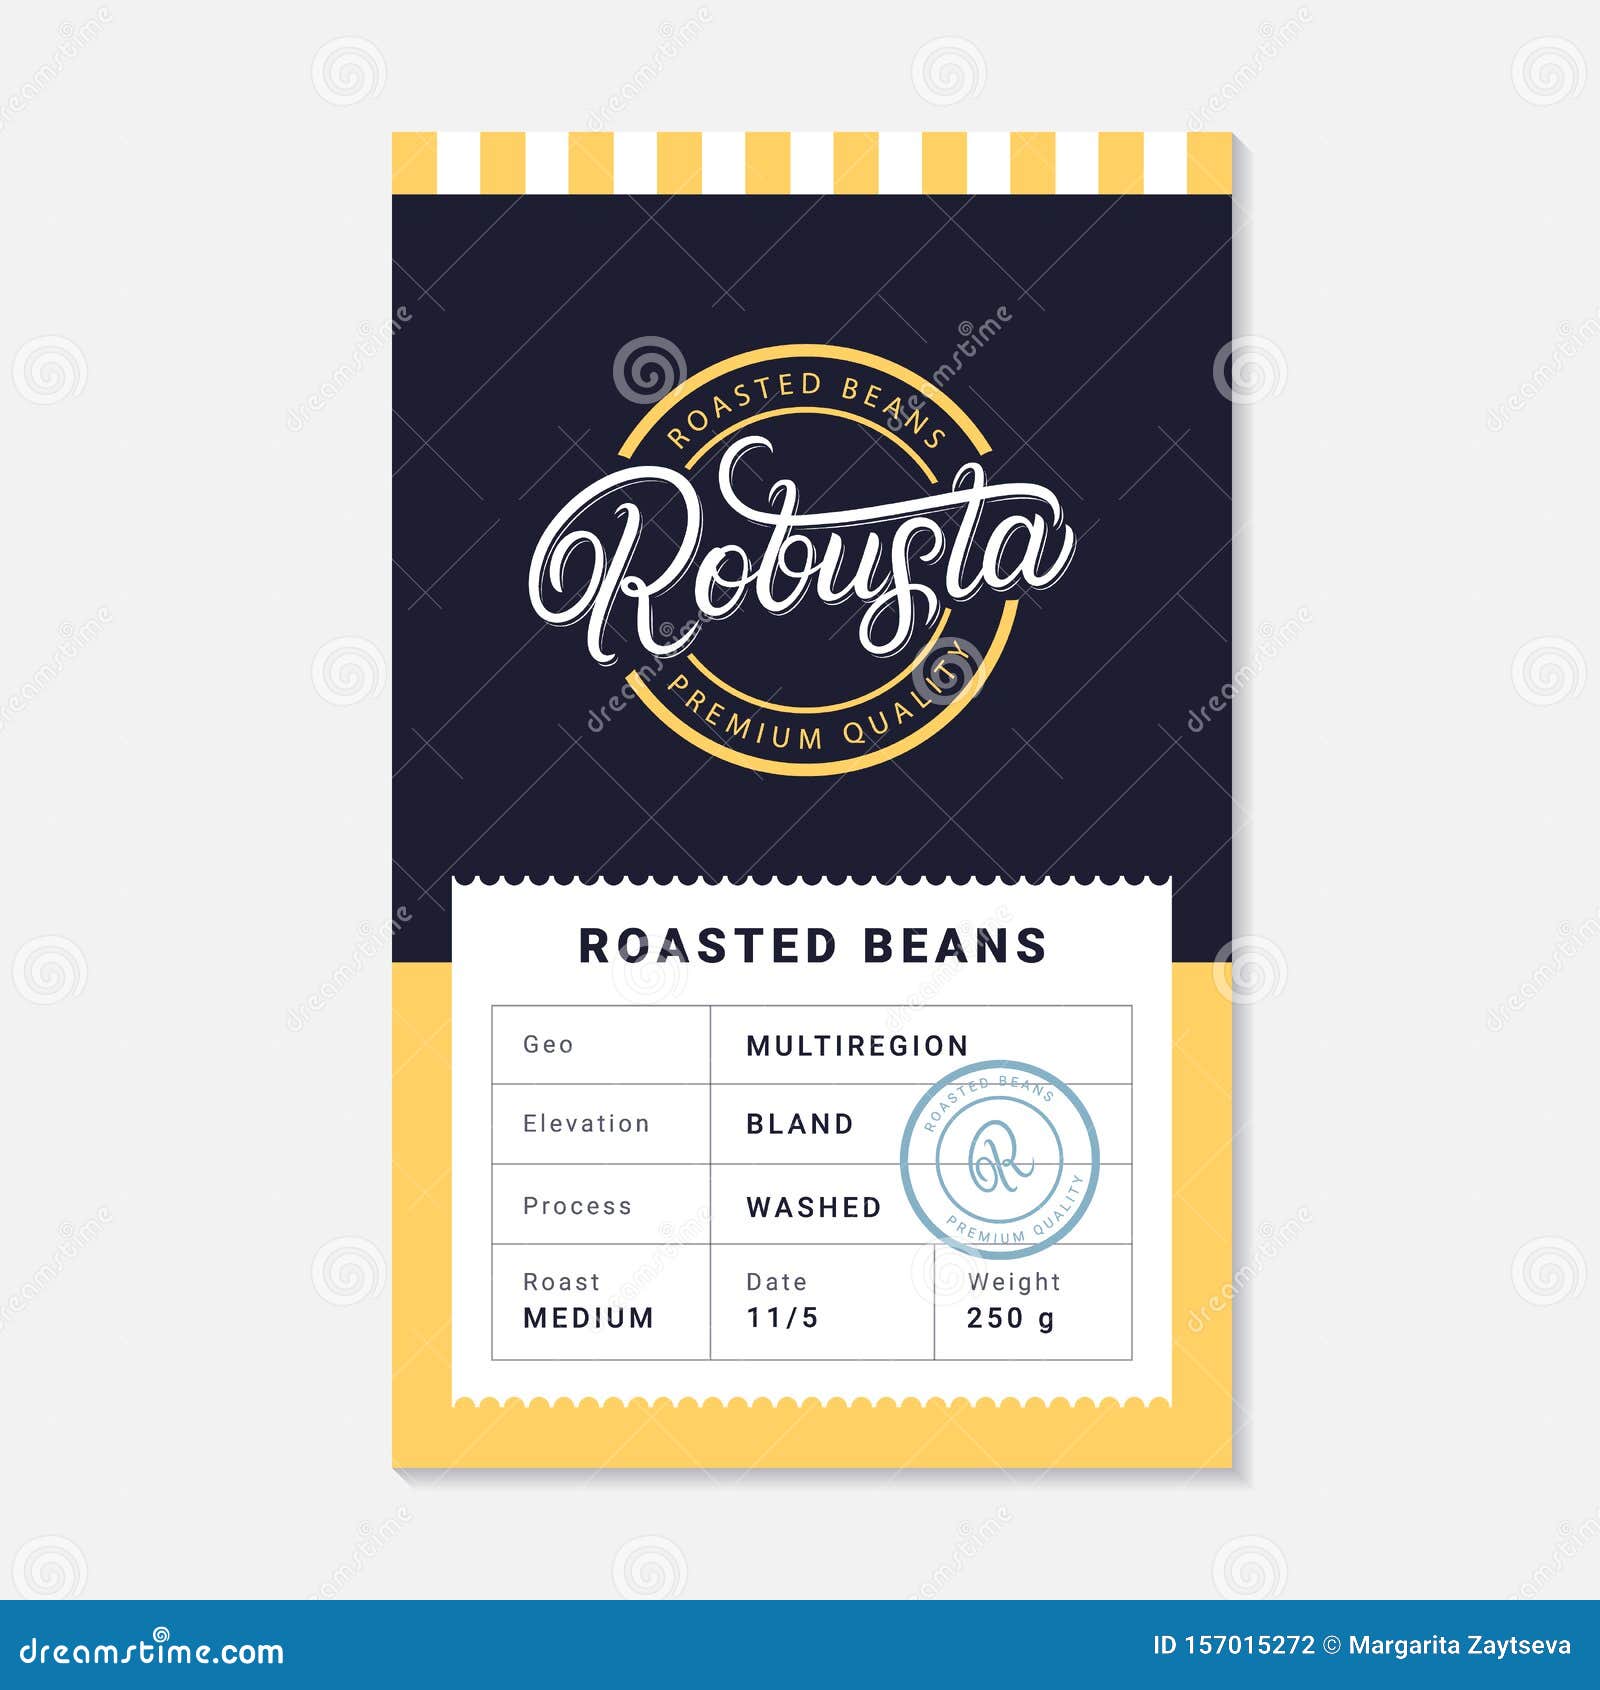 Download Robusta Coffee Beans Packaging Label Design Template ...